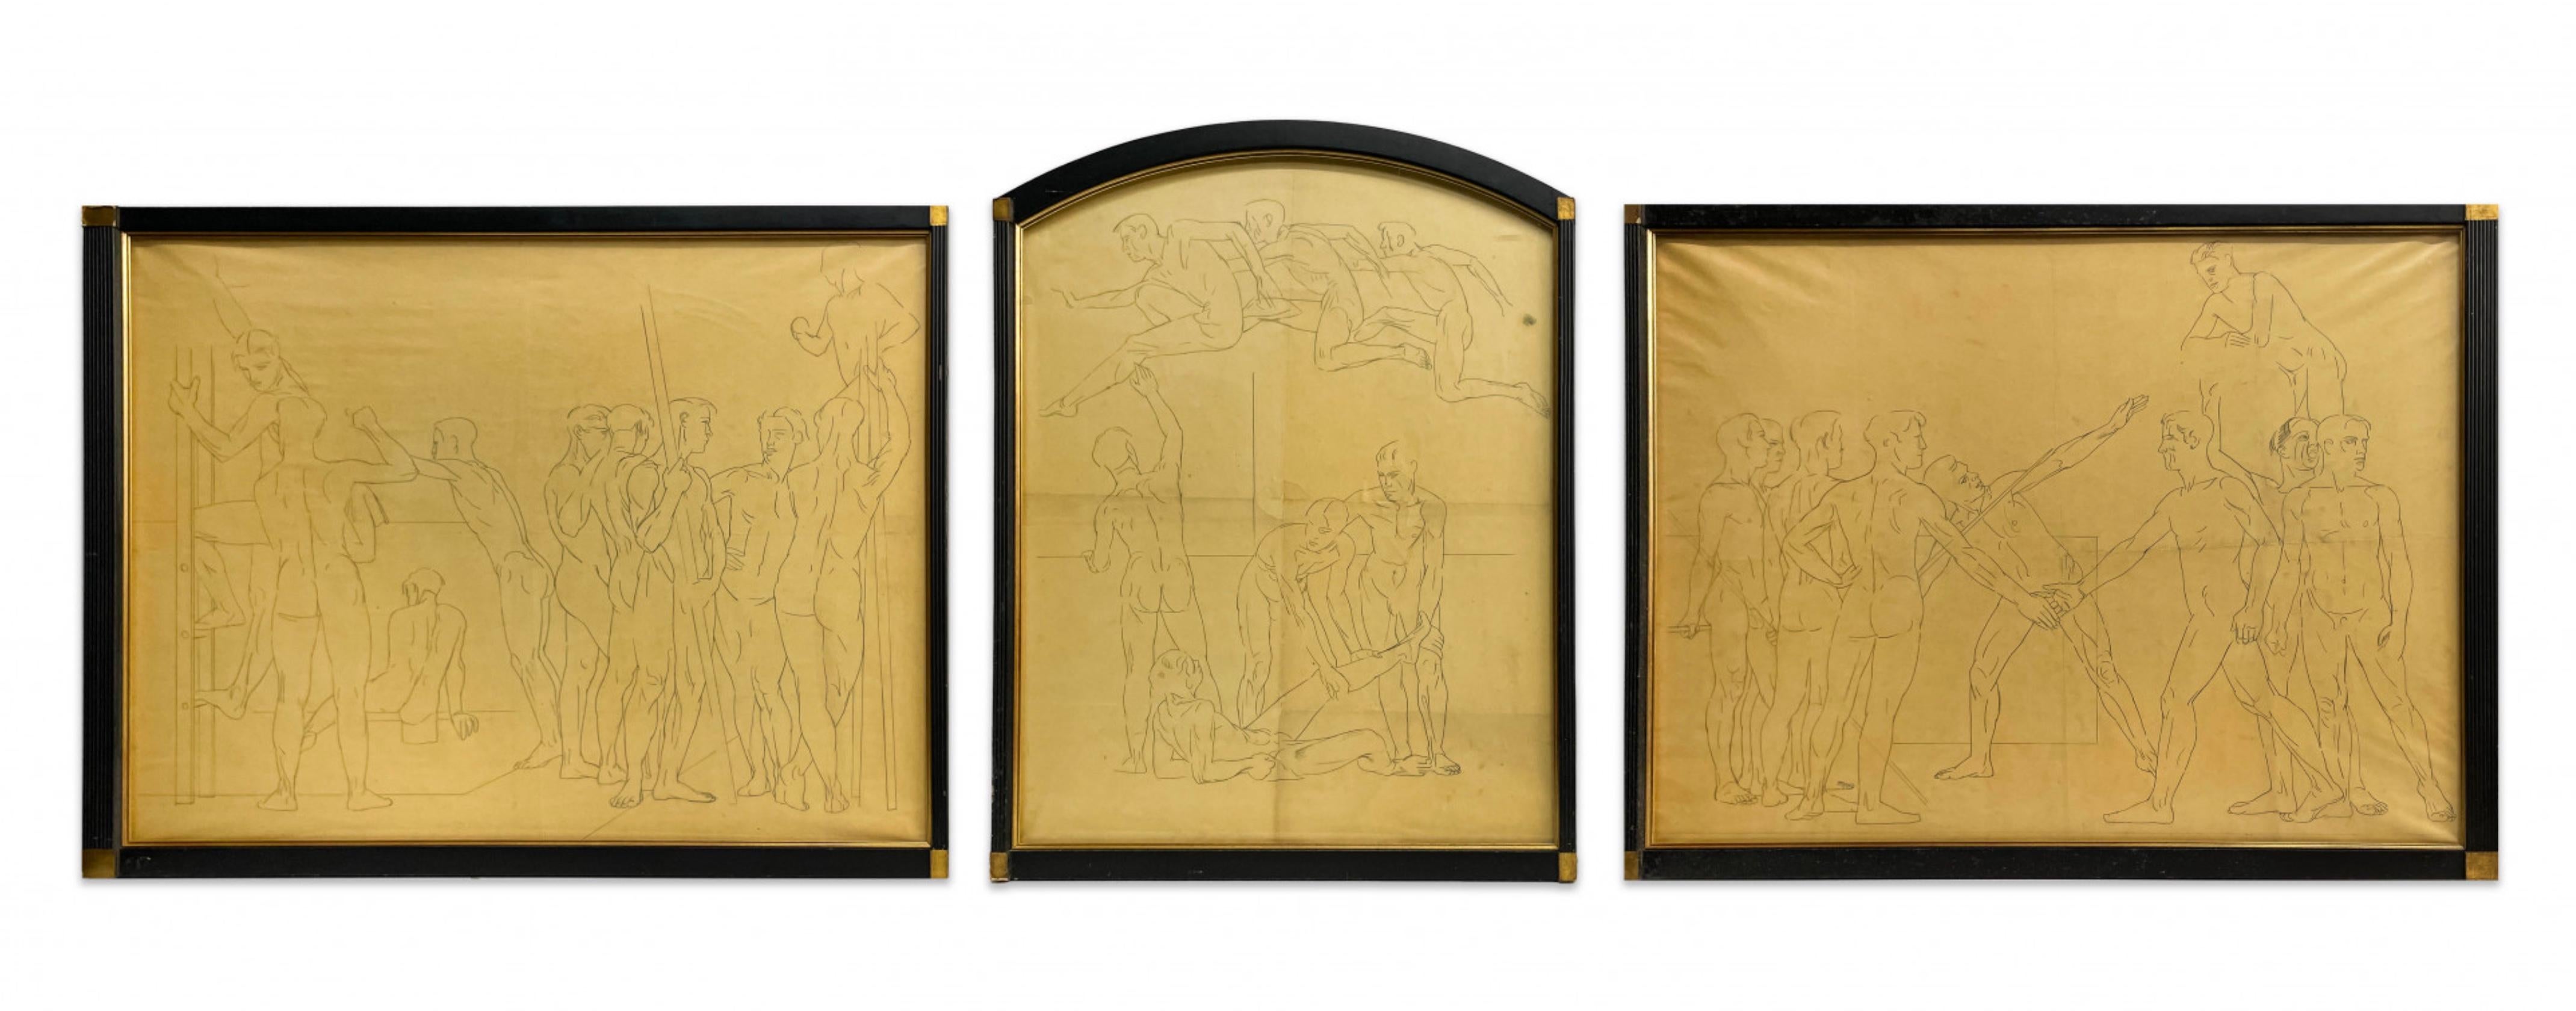 James Stroudley Figurative Art - A Triptych: The Olympic Games, Modern British Drawing, Ancient Greek, Nude